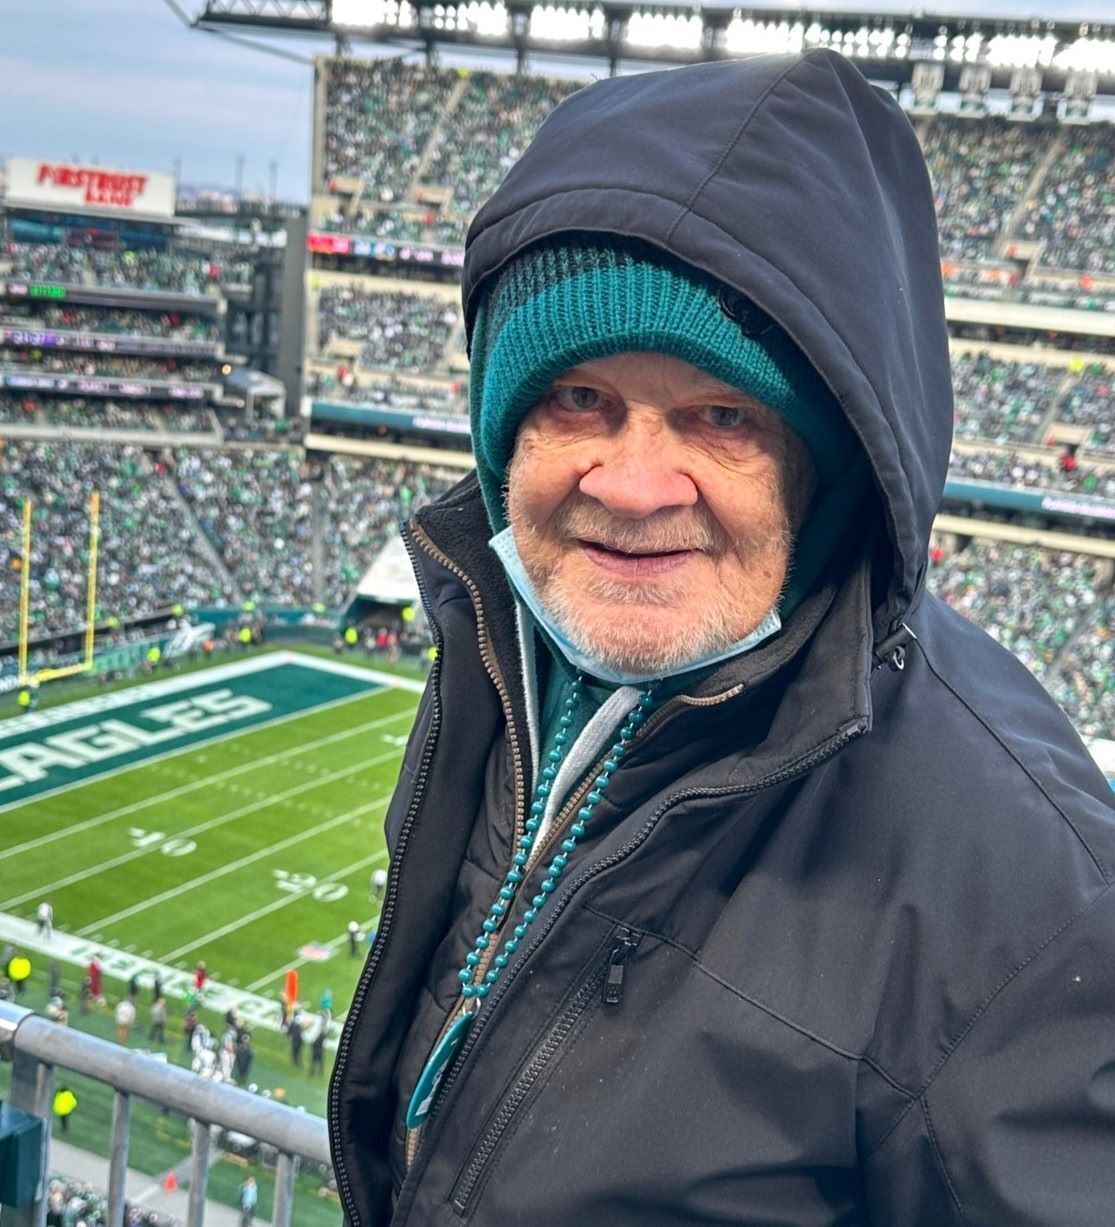 Irvin attends first-ever Philadelphia Eagles Game on New Year's Eve.